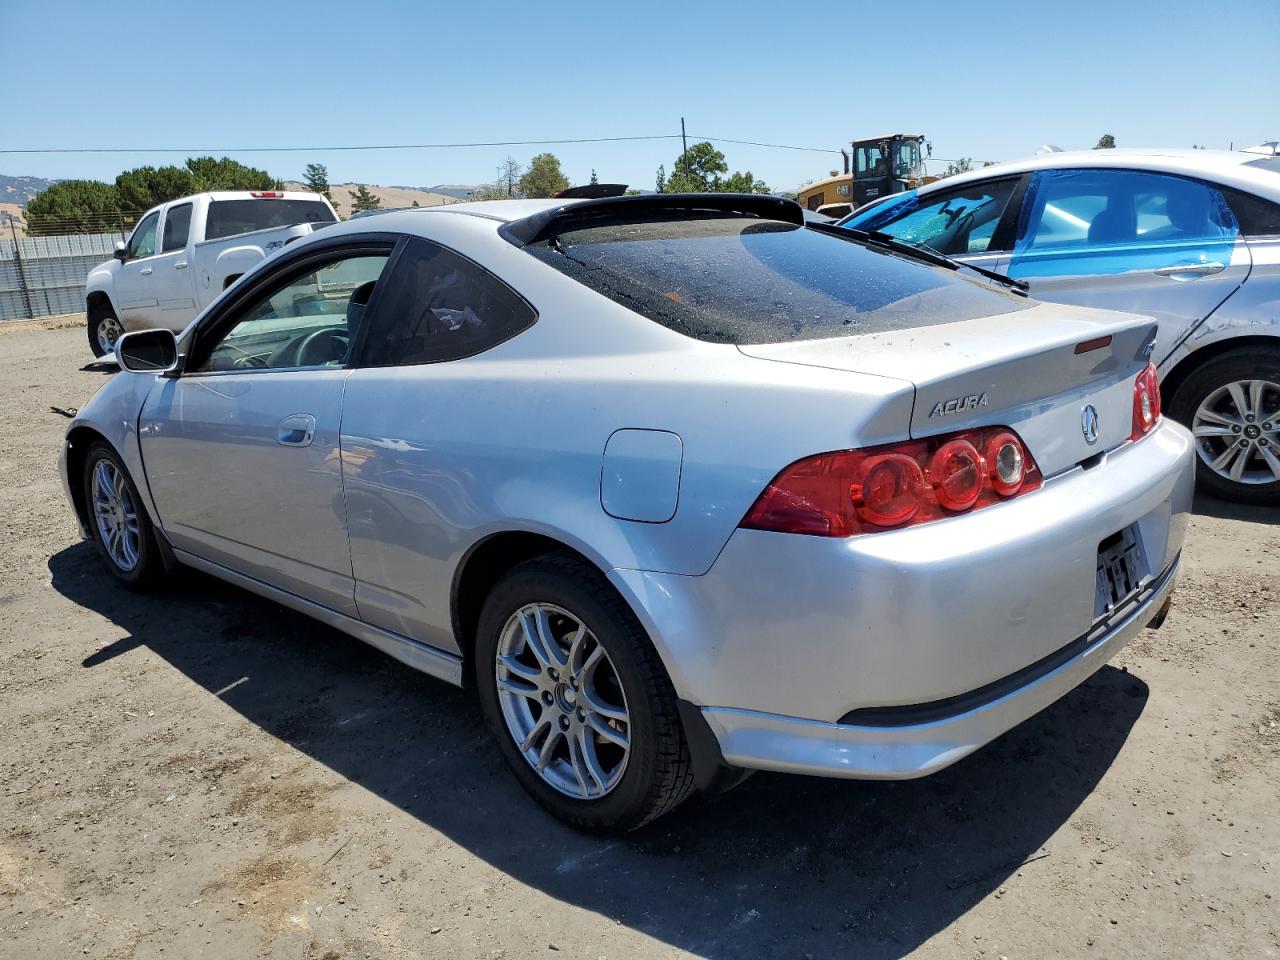 JH4DC54885S008377 2005 Acura RSX at CA - San Martin, Copart lot 